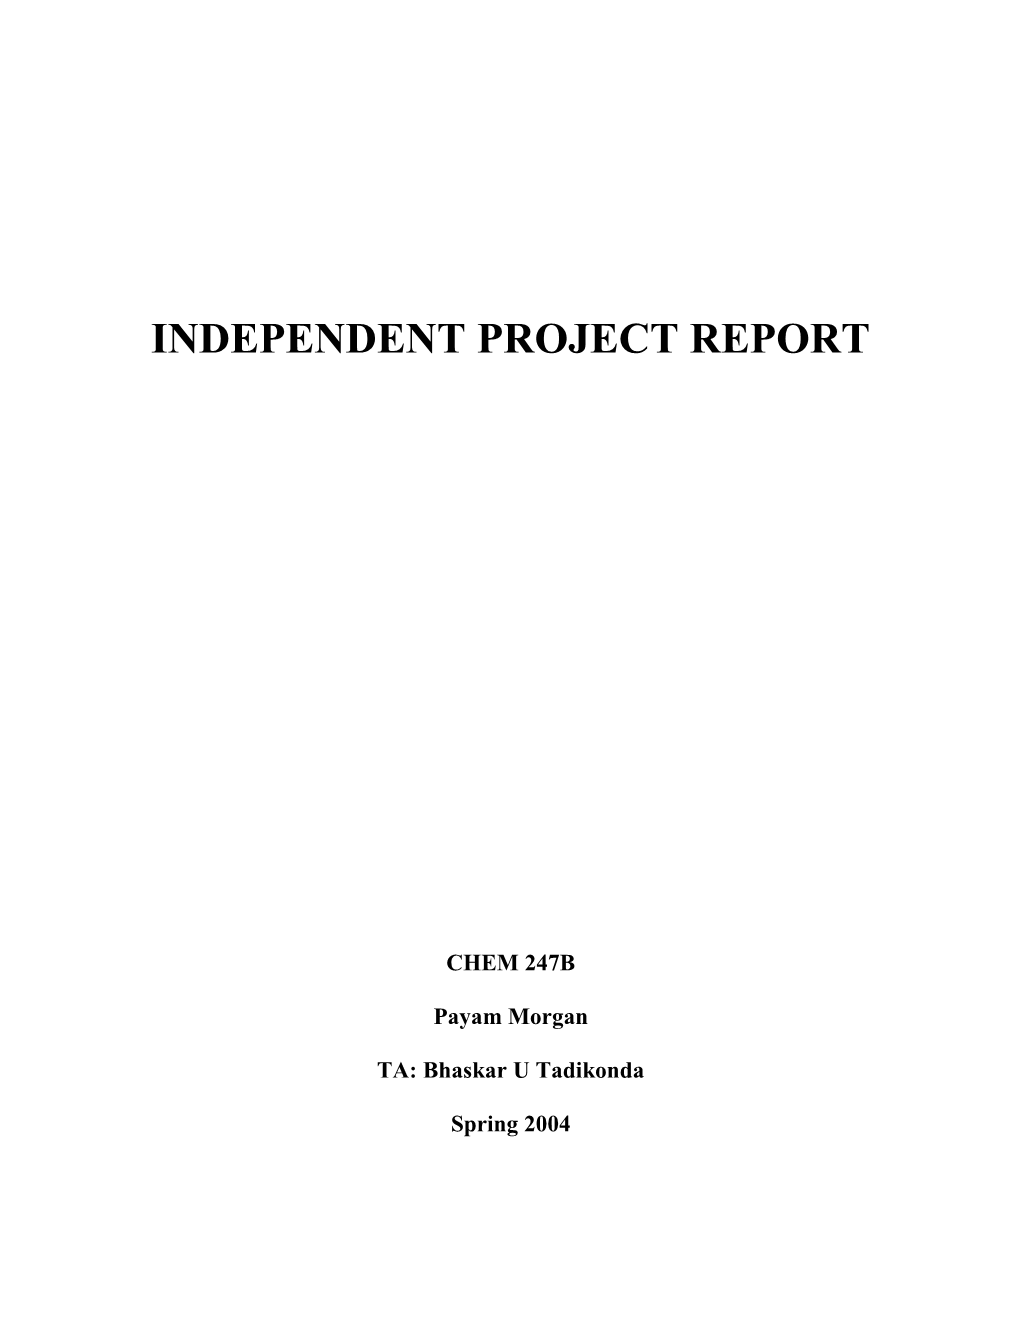 Independent Project Report